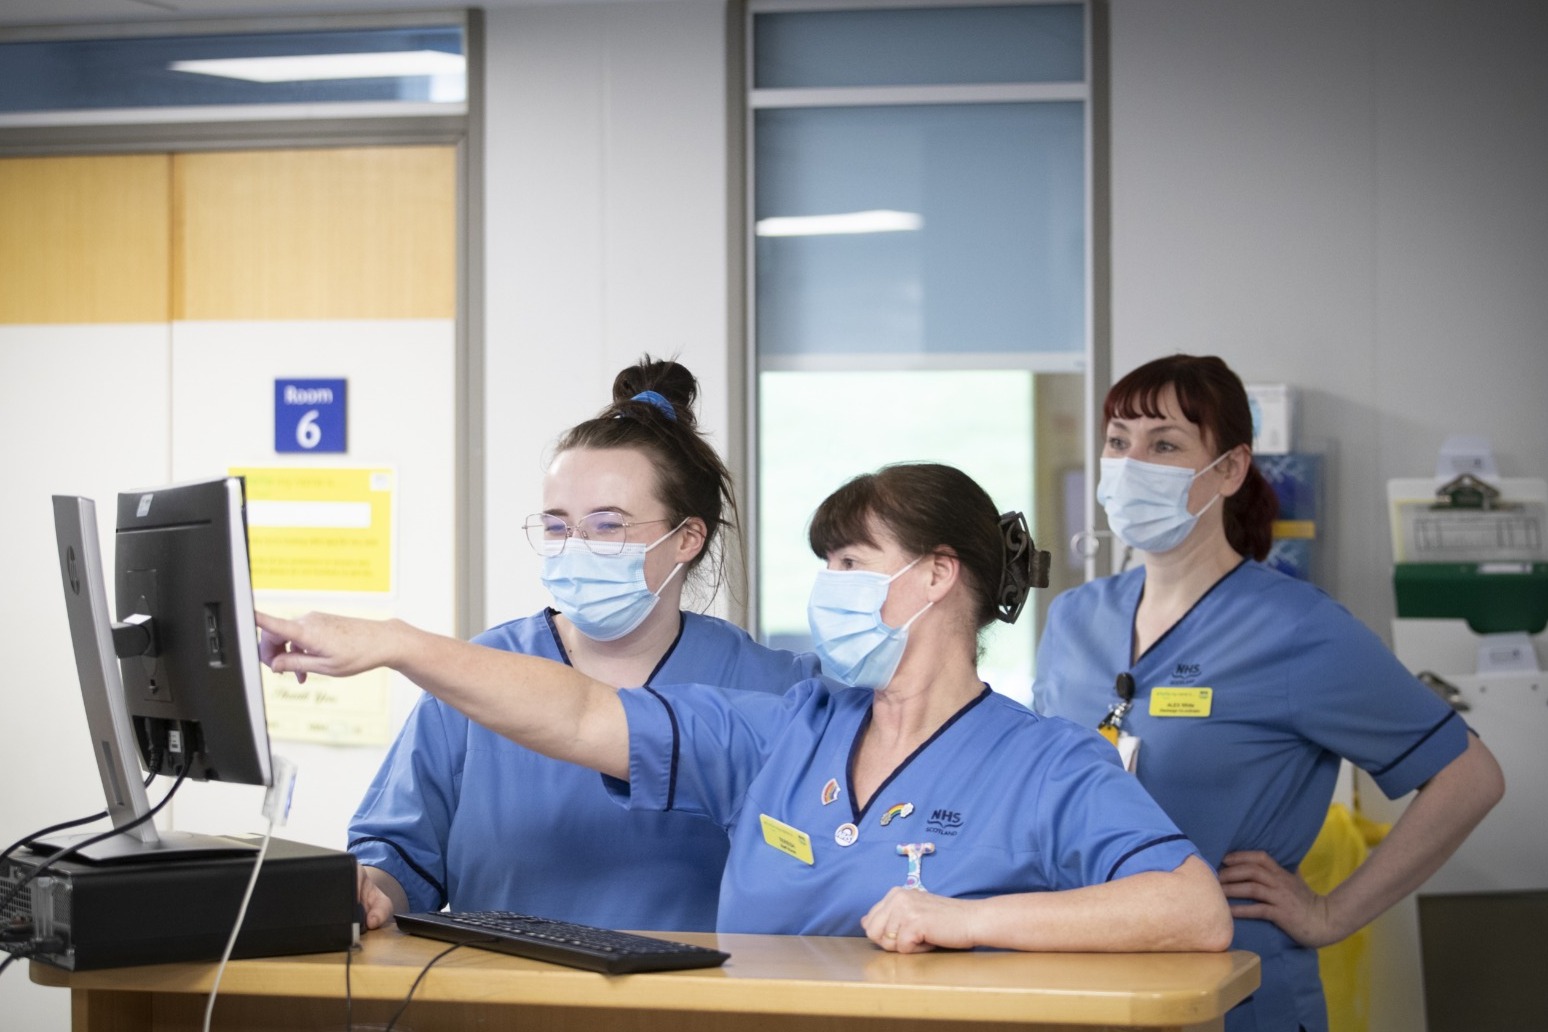 ‘Nightingale effect’ sees surge in nurses joining NHS during pandemic 